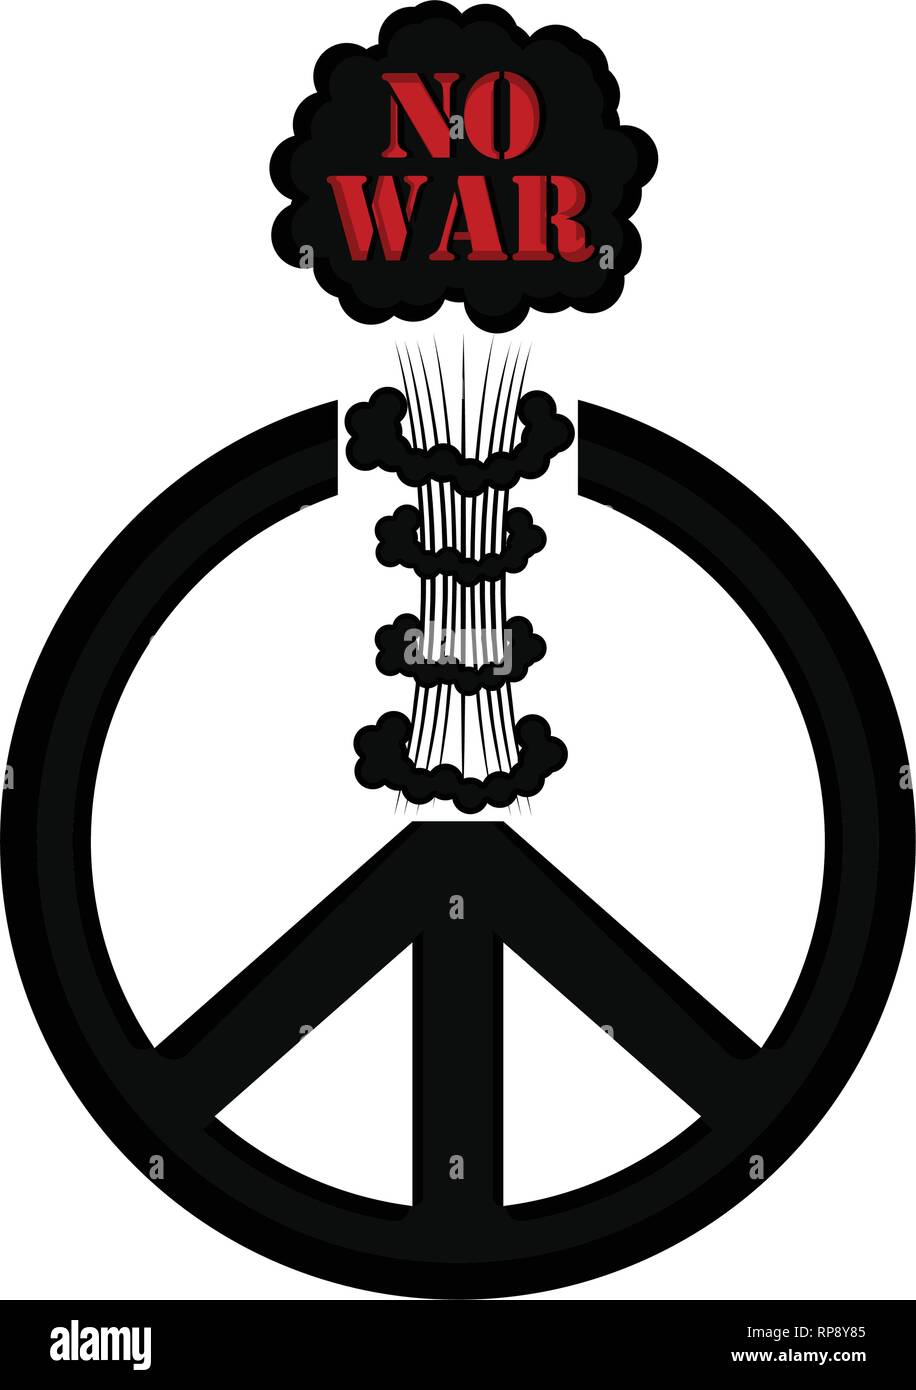 No war banner with a peace symbol Stock Vector